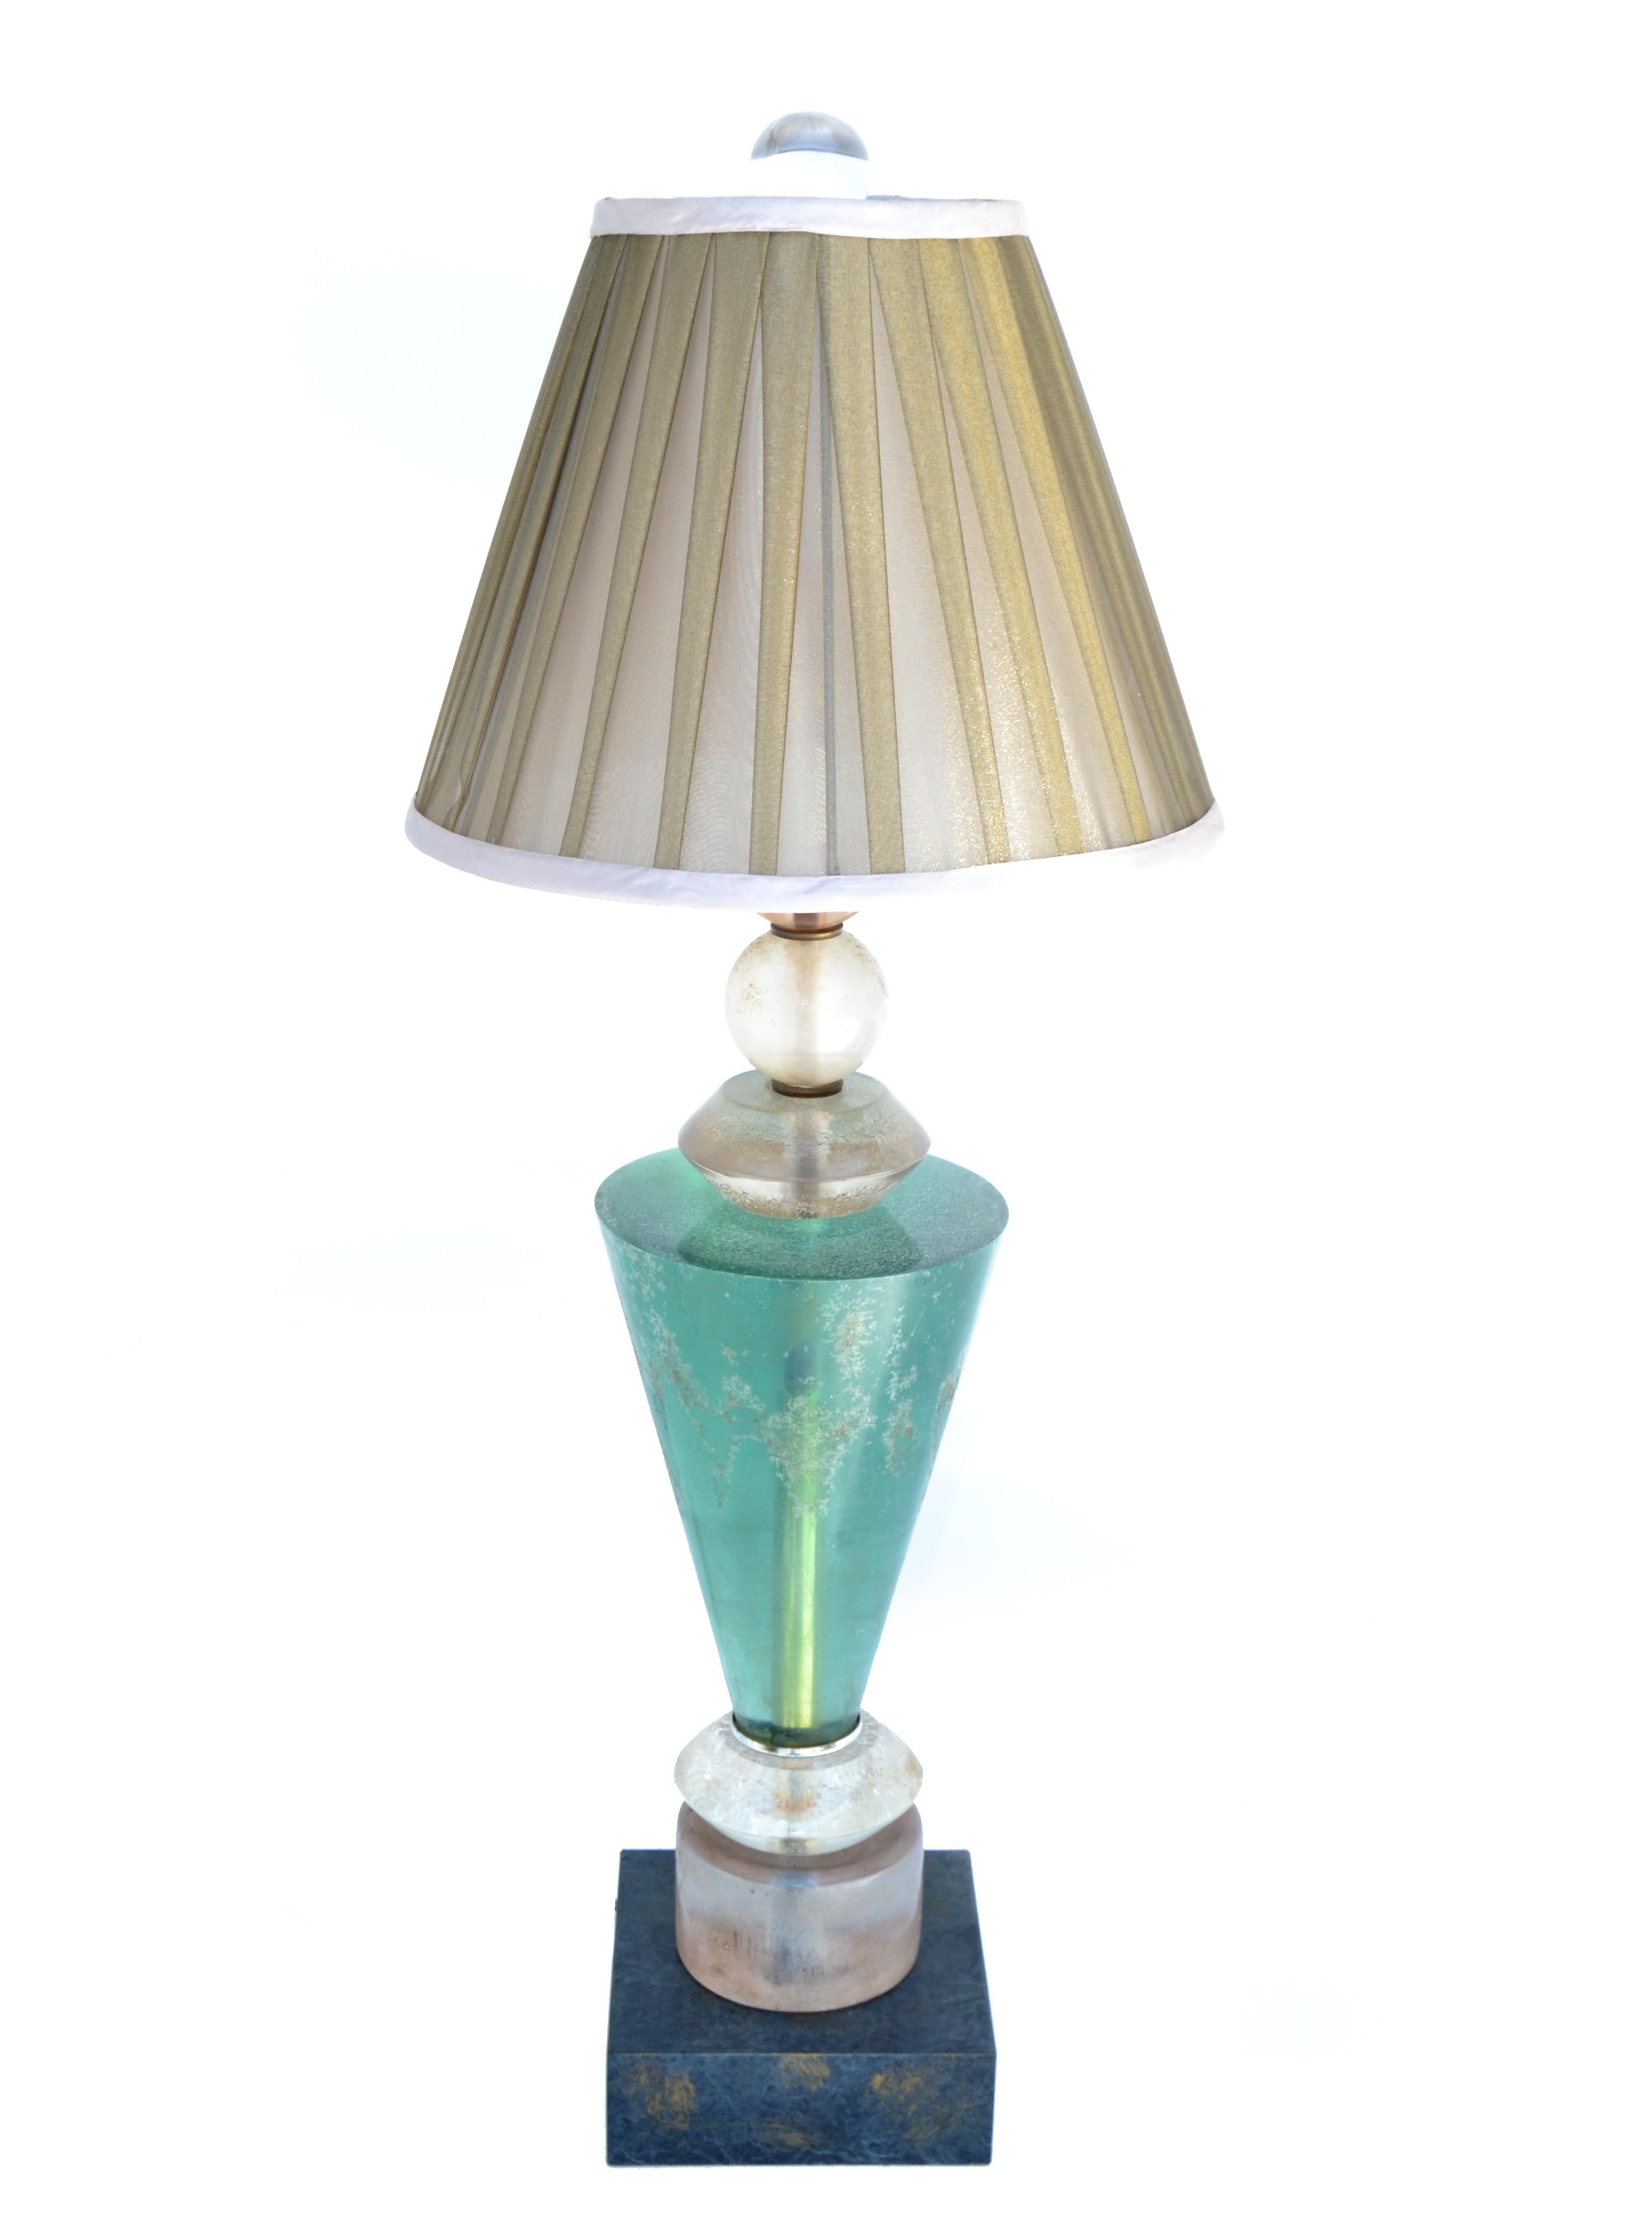 Van Teal Mid-Century Modern Green, Black & Gold Lucite Table Lamp Pleated Shade For Sale 8